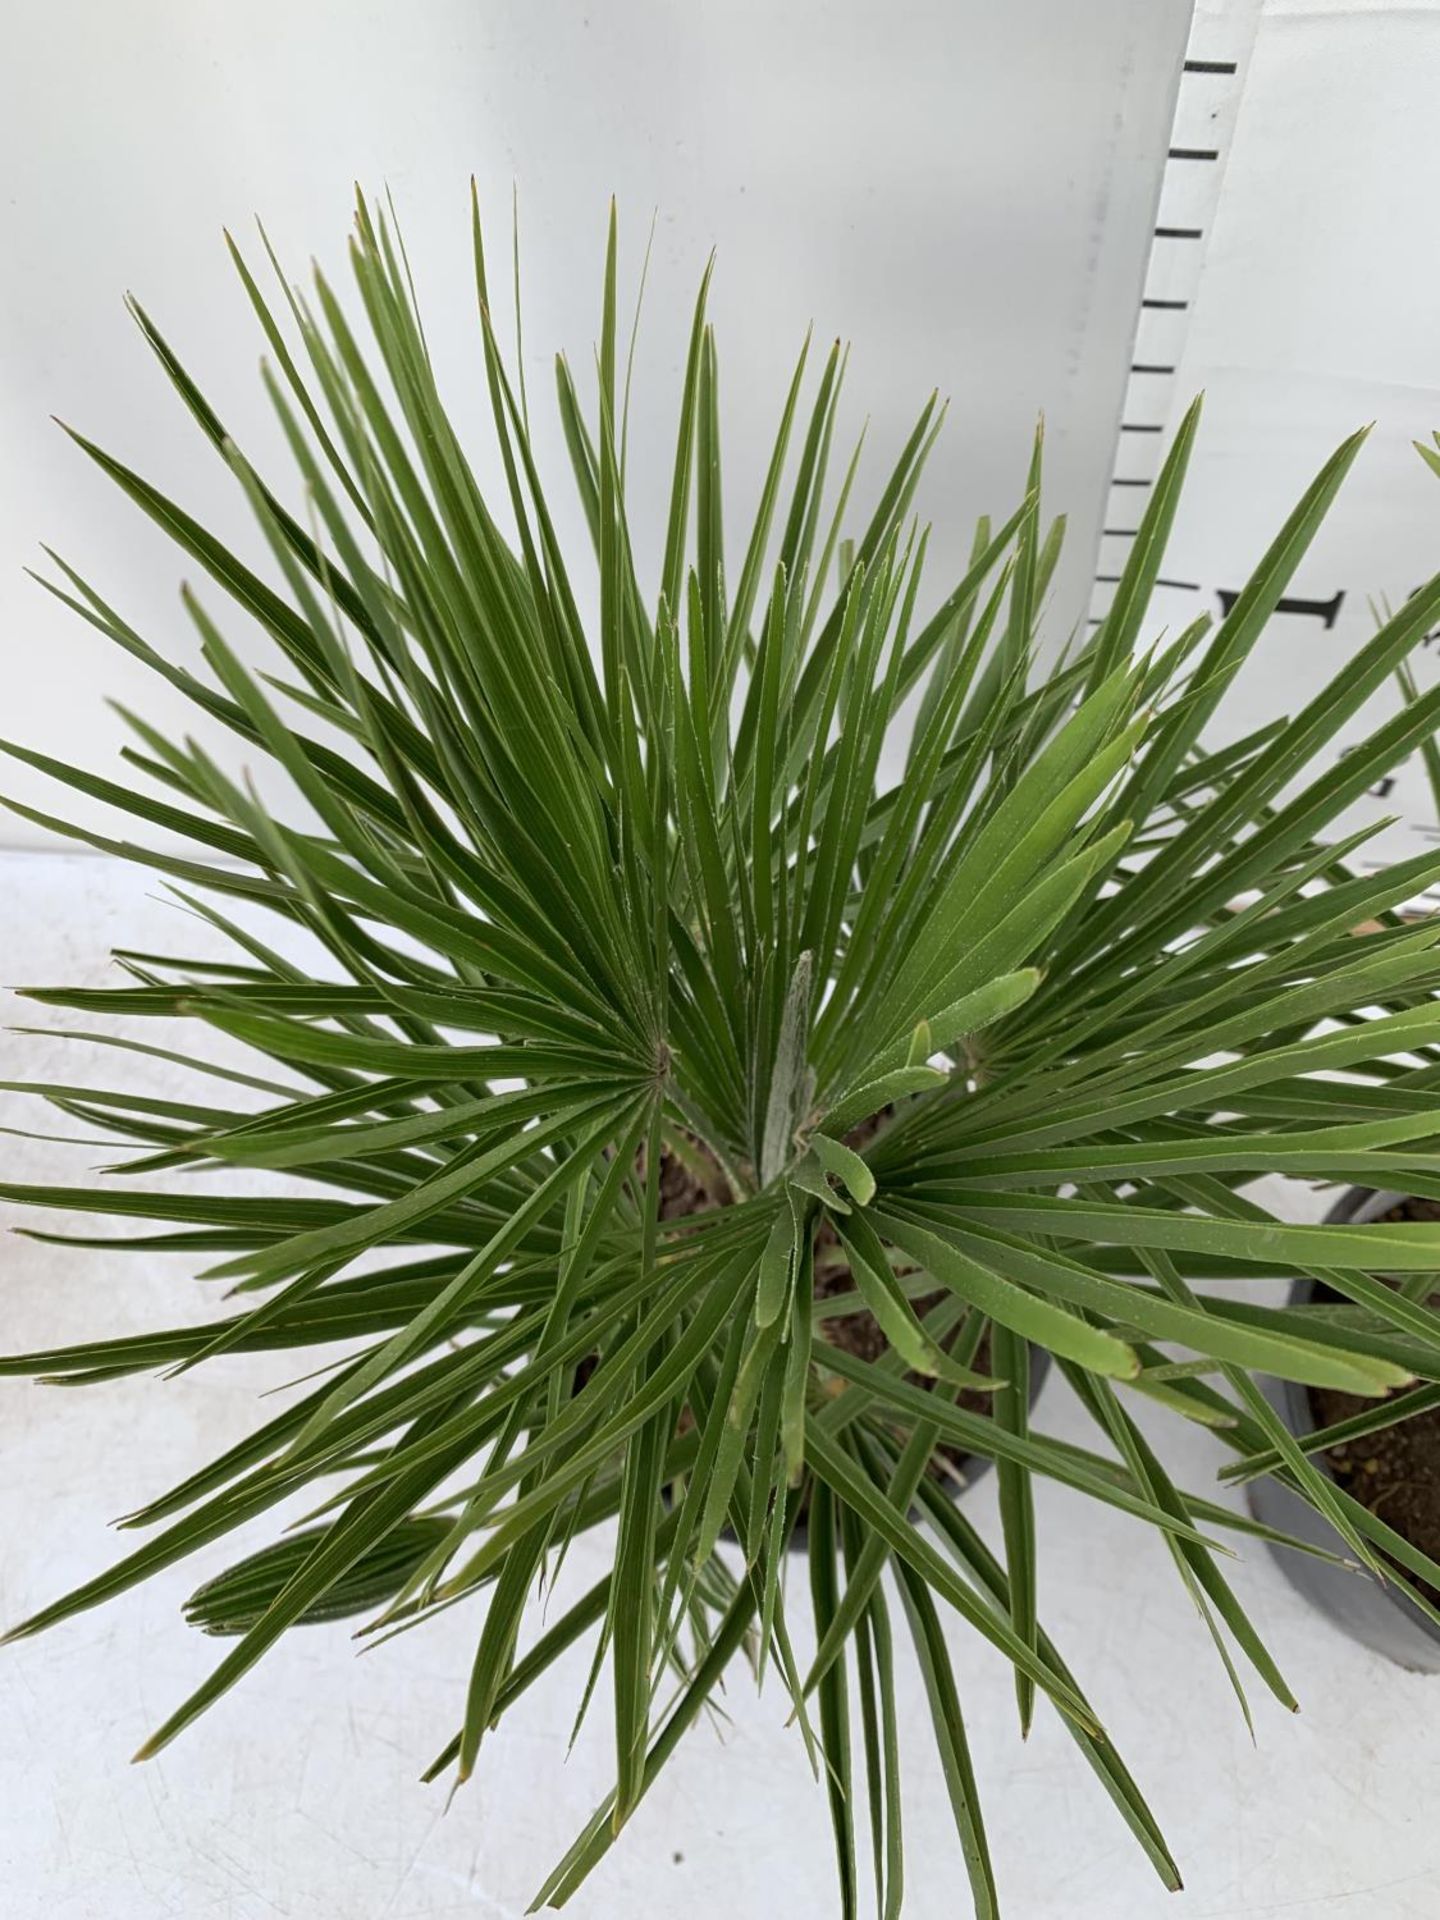 TWO CHAMAEROPS HUMILIS HARDY IN 3 LTR POTS APPROX 60CM IN HEIGHT PLUS VAT TO BE SOLD FOR THE TWO - Image 3 of 5